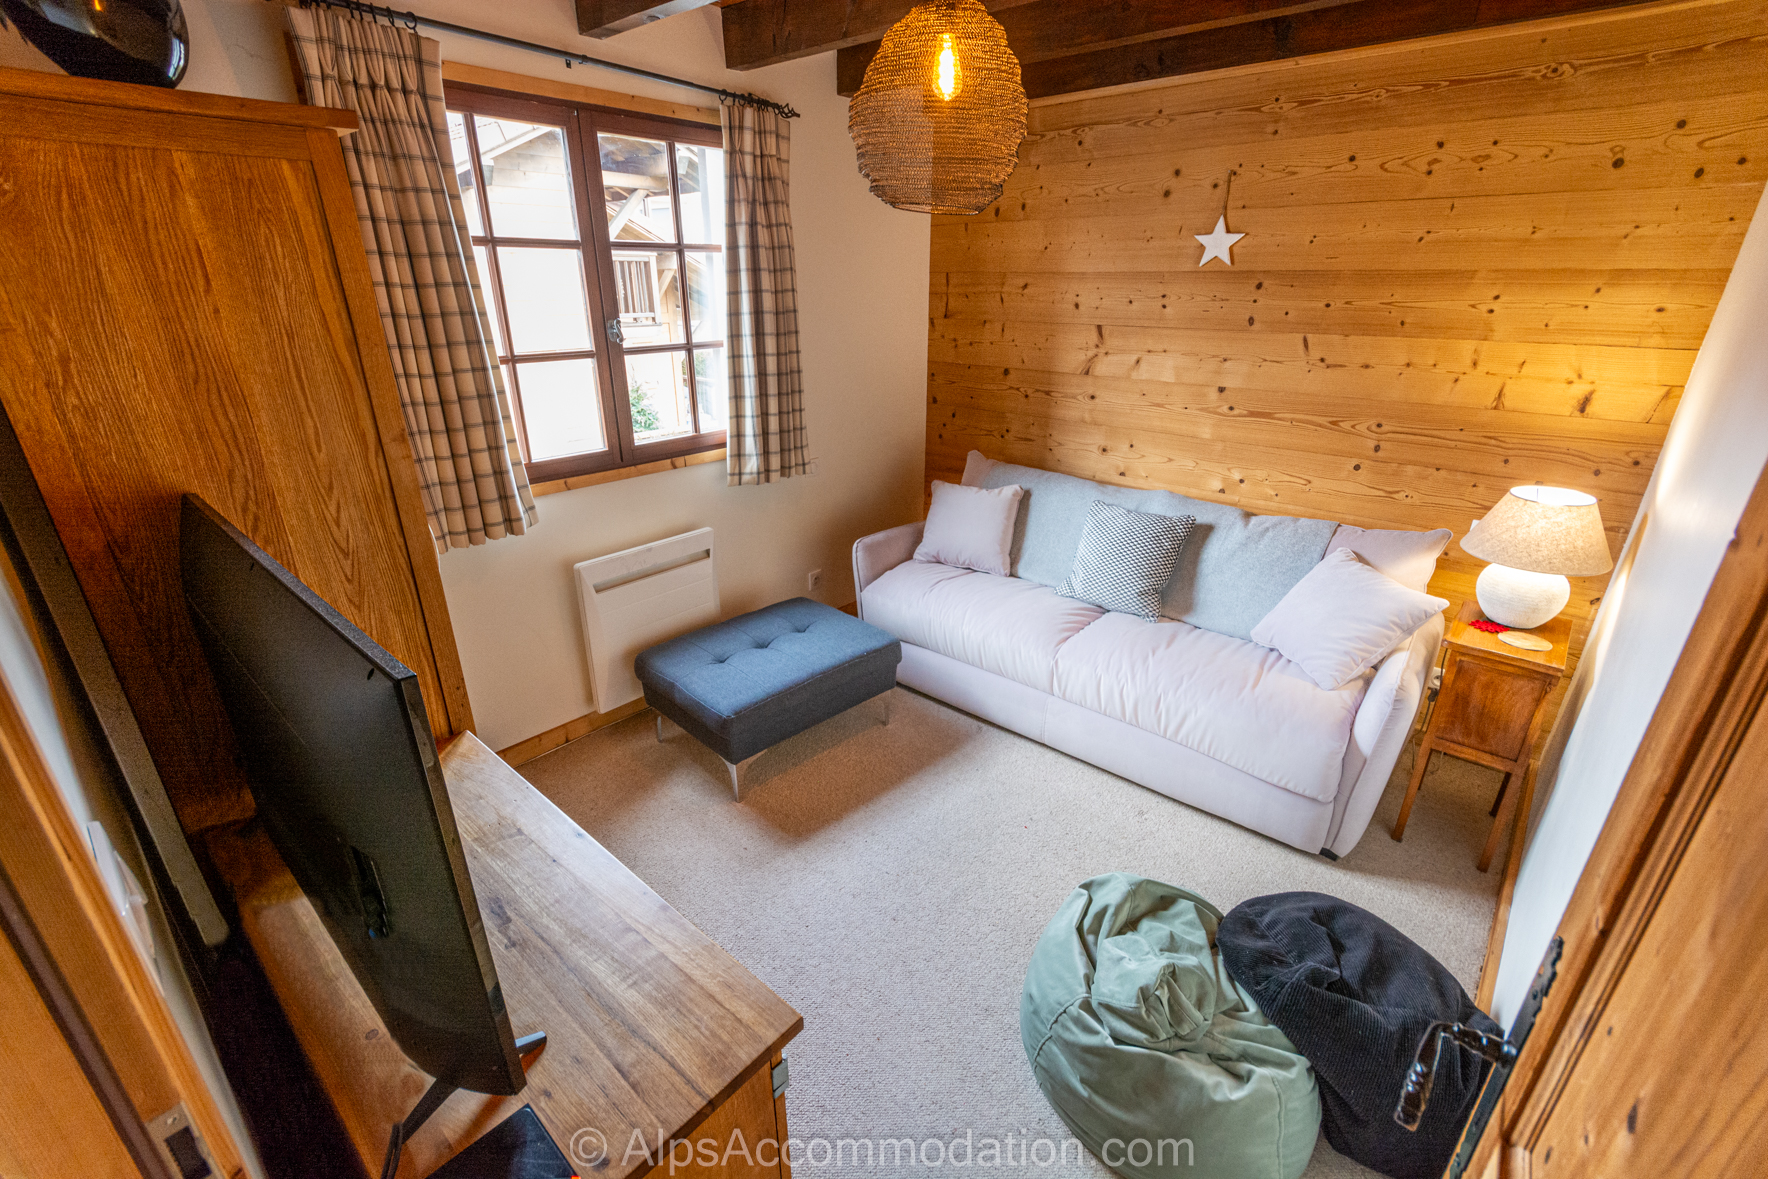 Chalet Étoile Morillon - Snug with TV, games console and a high quality sofa bed which can also be arranged as a fifth bedroom with king size bed.